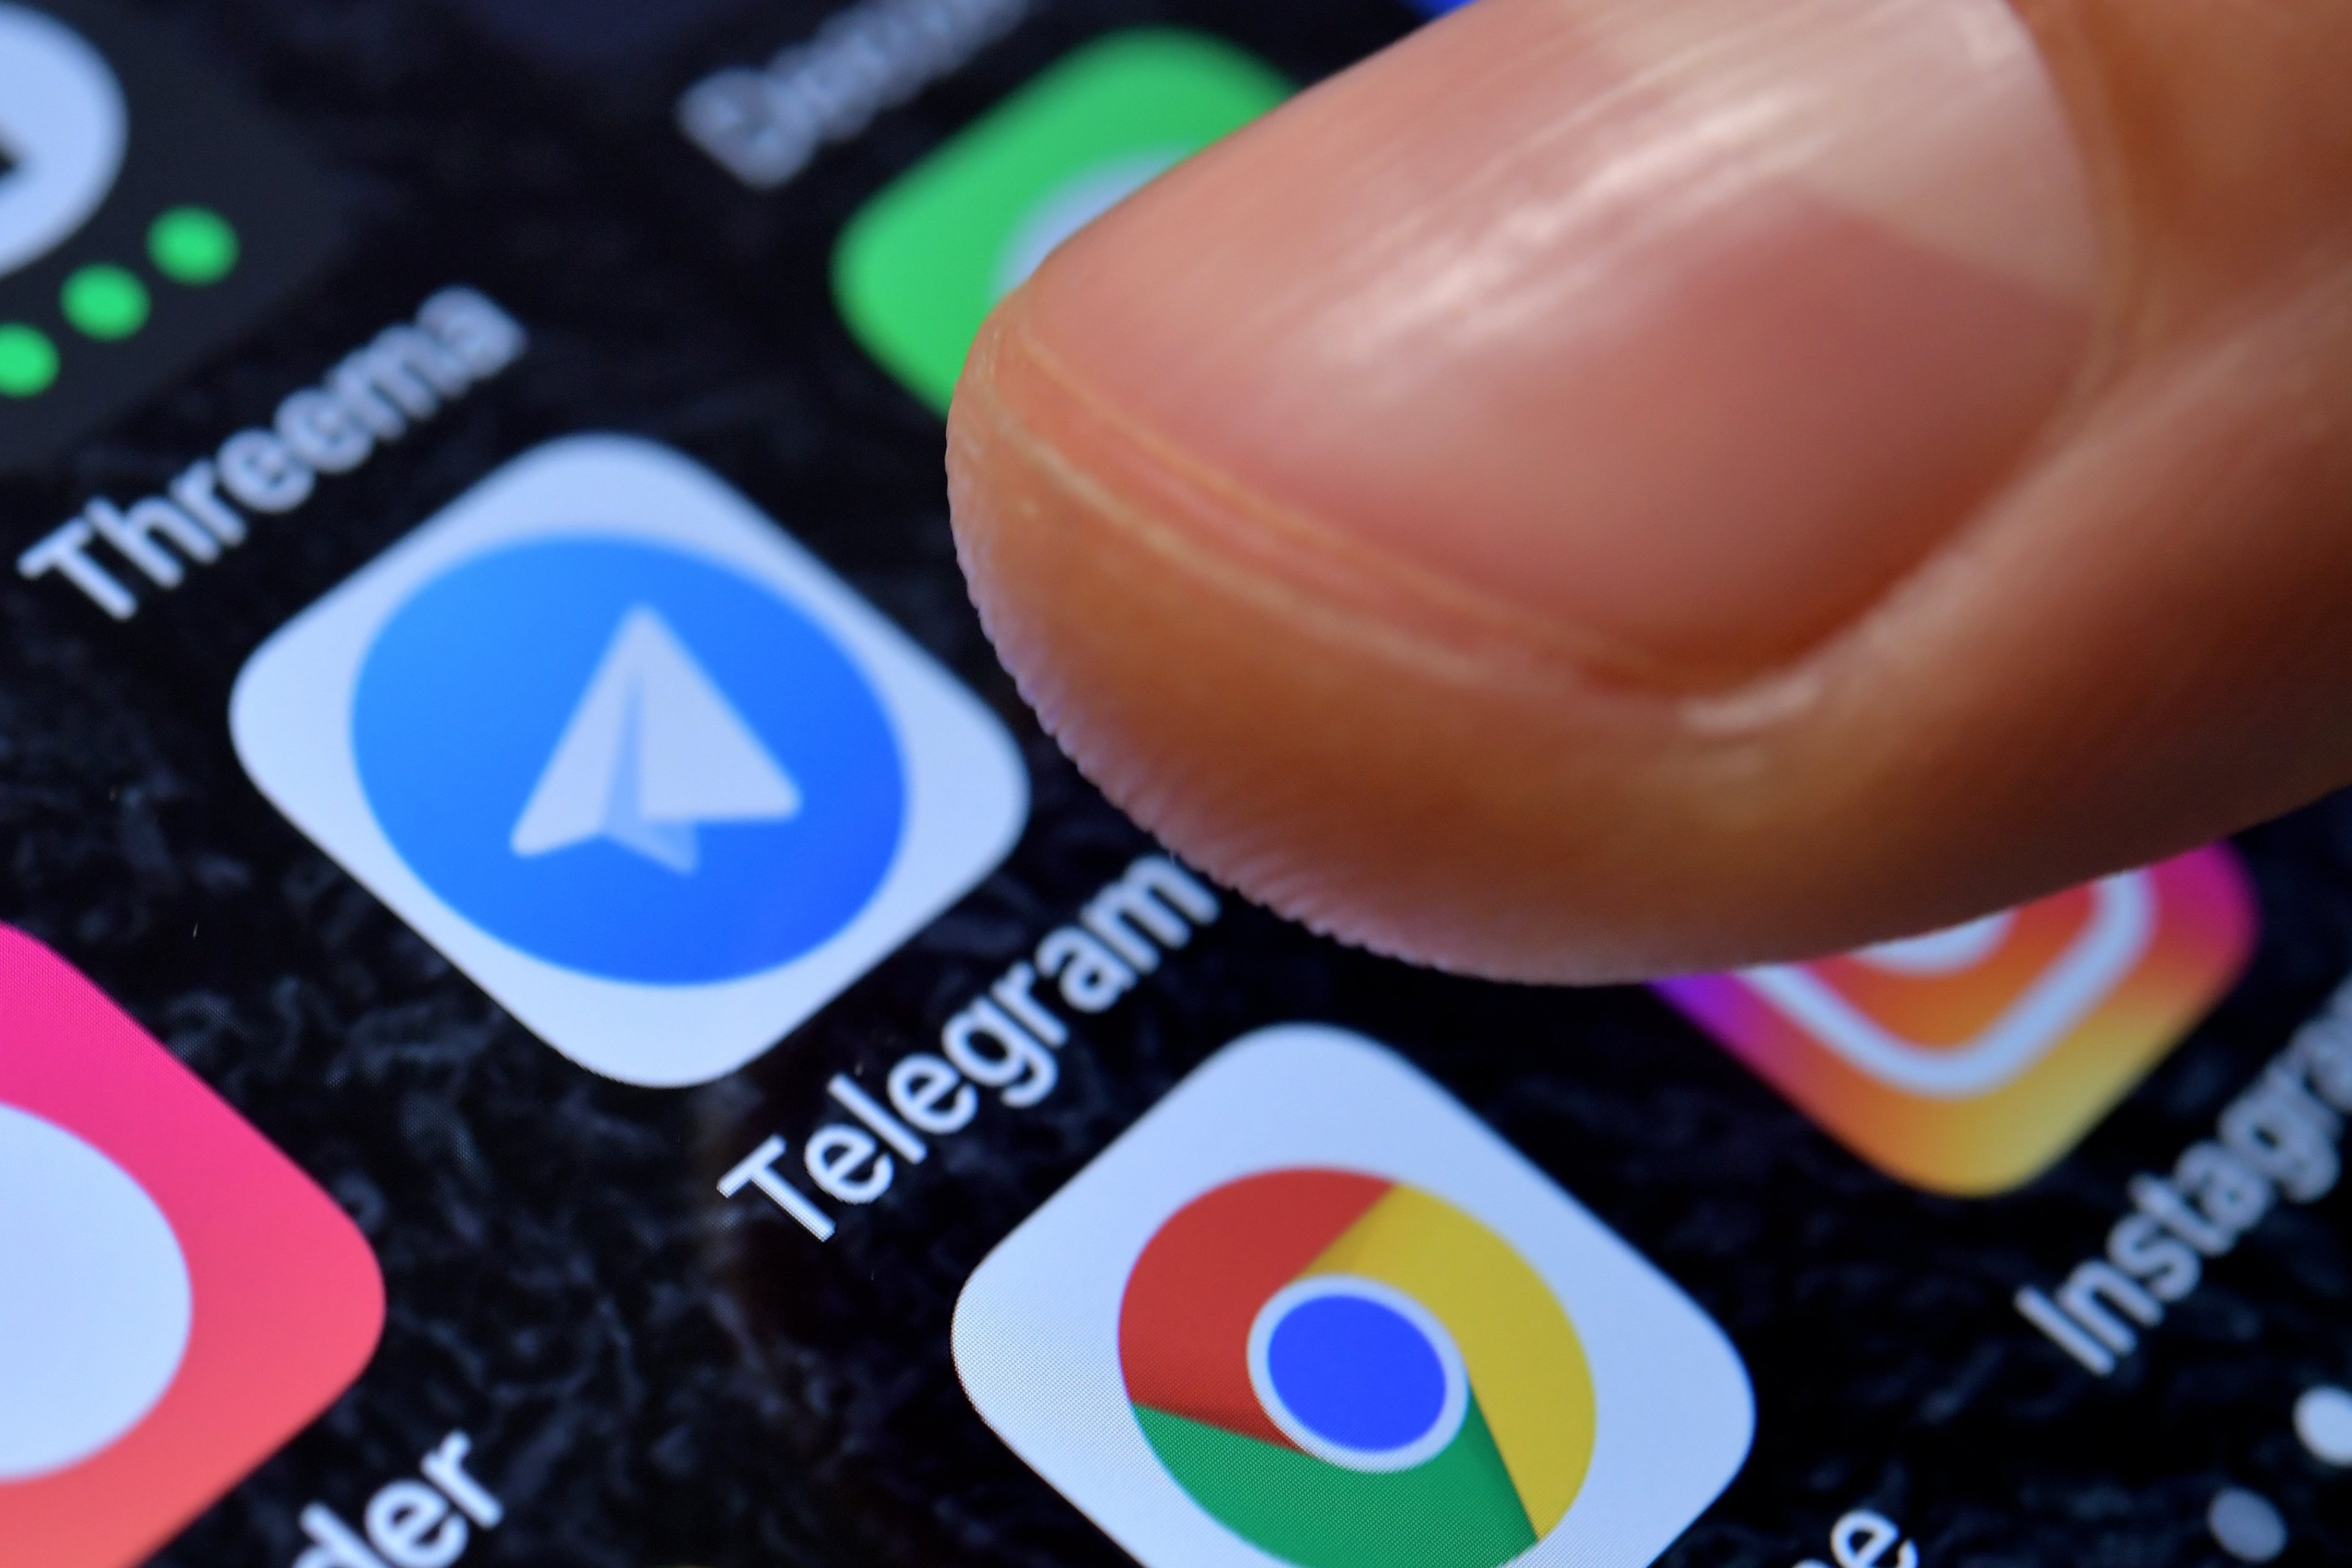 Telegram is expected to release its own cryptocurrency, called the Gram, by October 31. The new digital money can be stored in the Gram digital wallet available on the messaging app. Photo: EPA-EFE